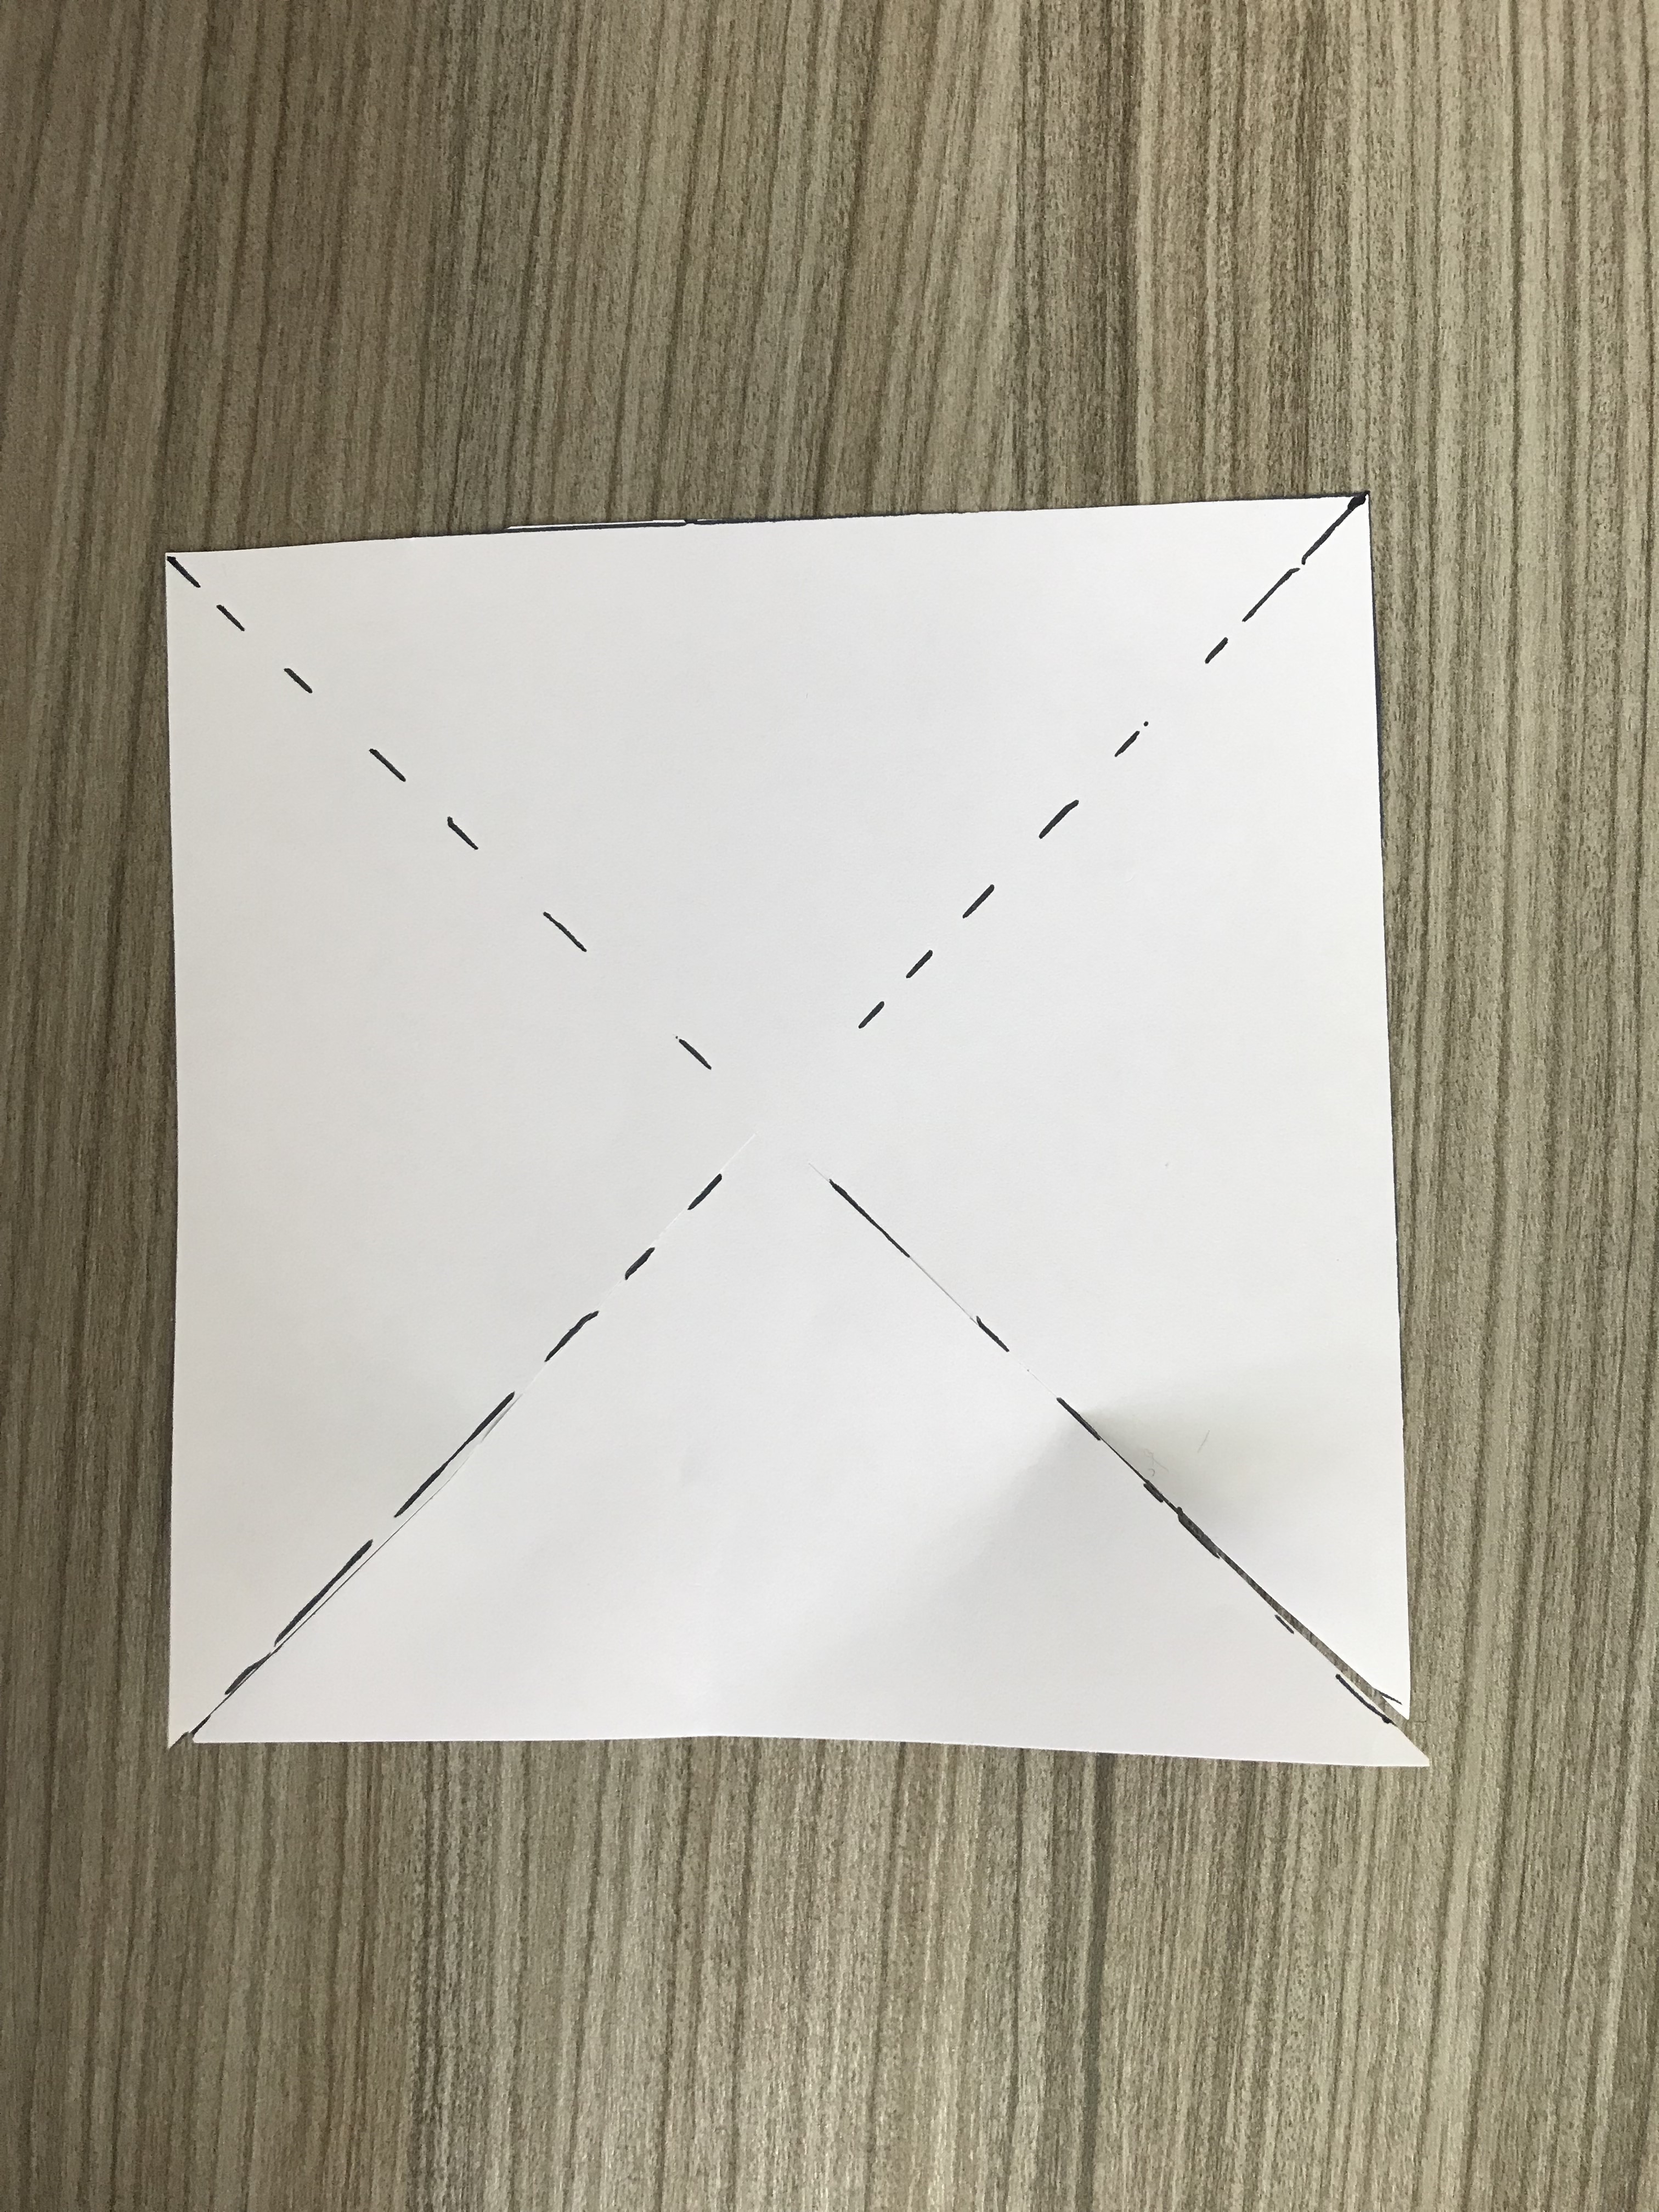 white square piece of paper on a desk with diagonal cuts made through it with a small bit left in the center.